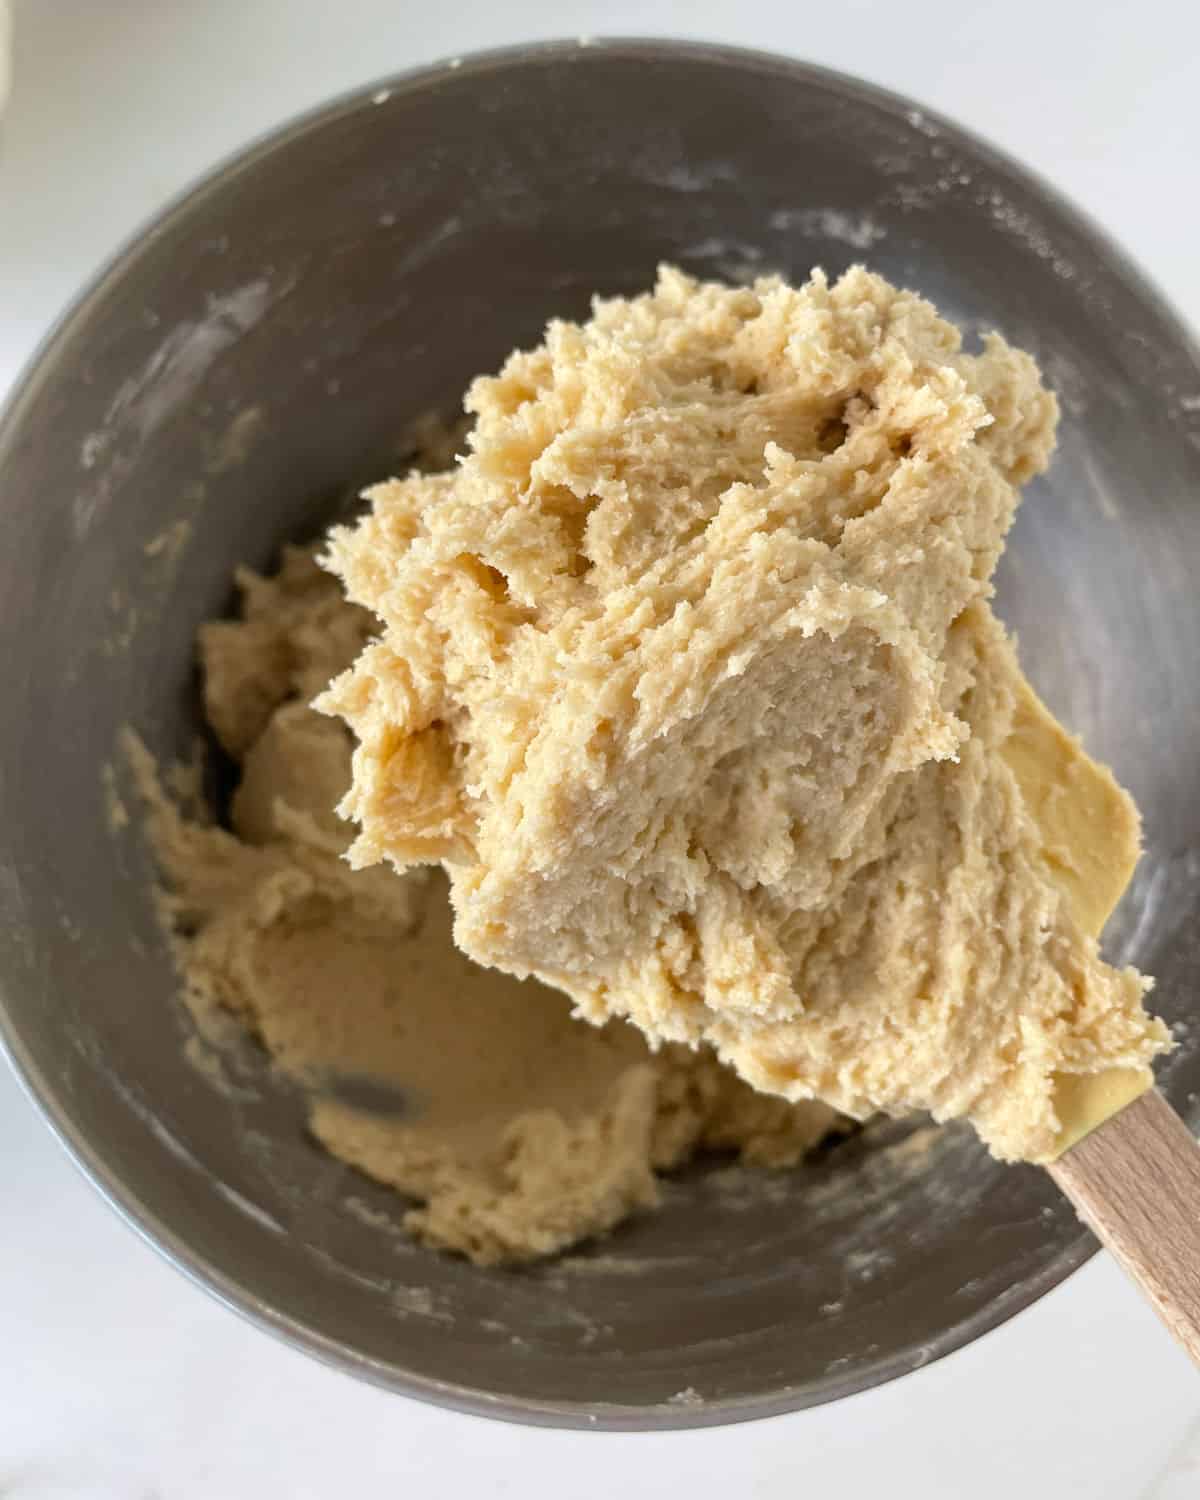 Cookie dough on a wooden spoon above the metal bowl with rest of batter.